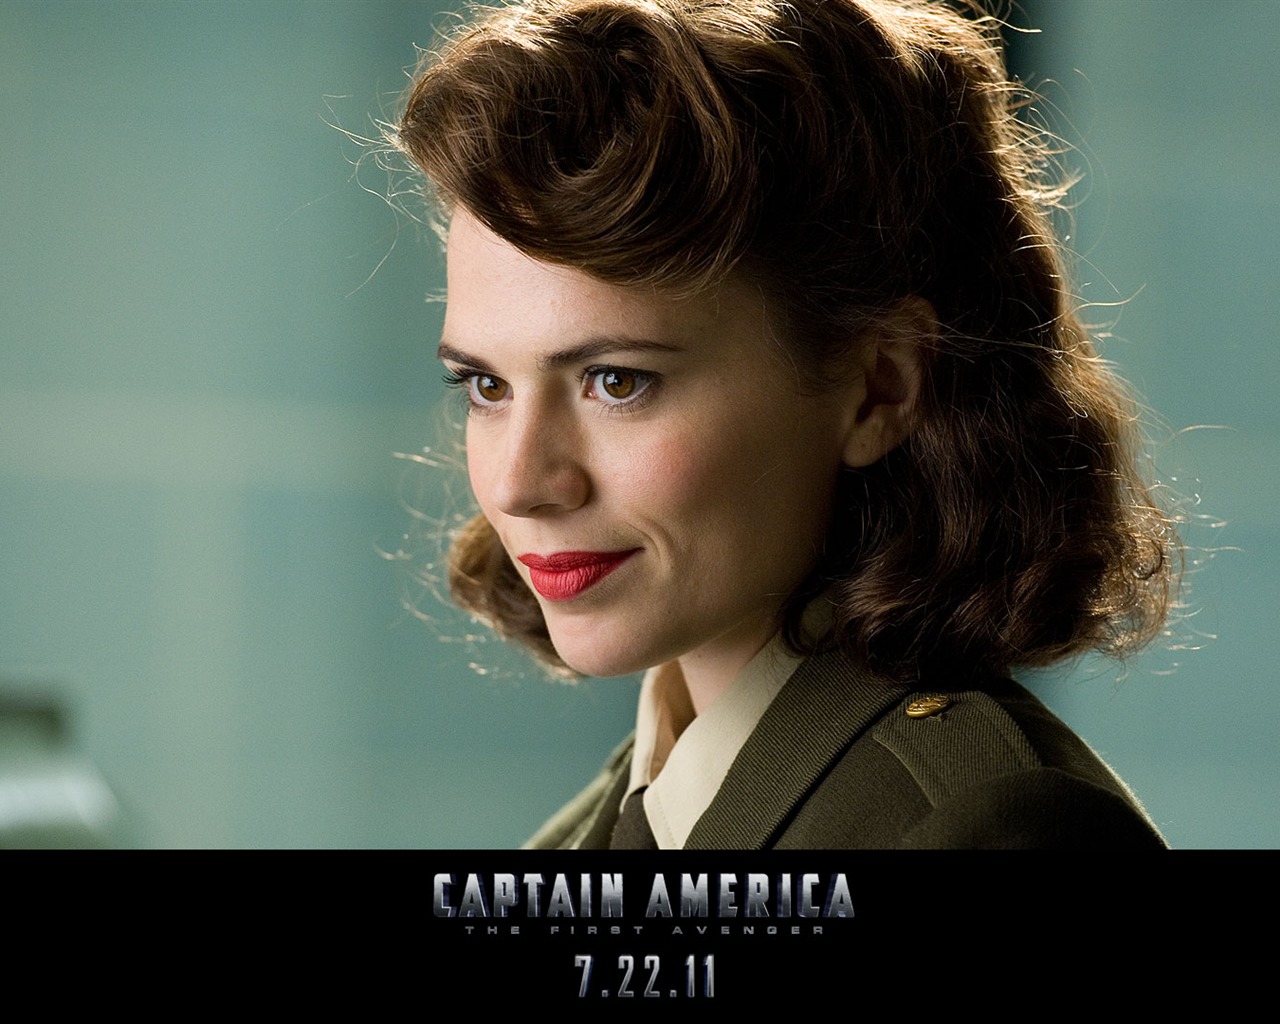 Captain America: The First Avenger wallpapers HD #11 - 1280x1024